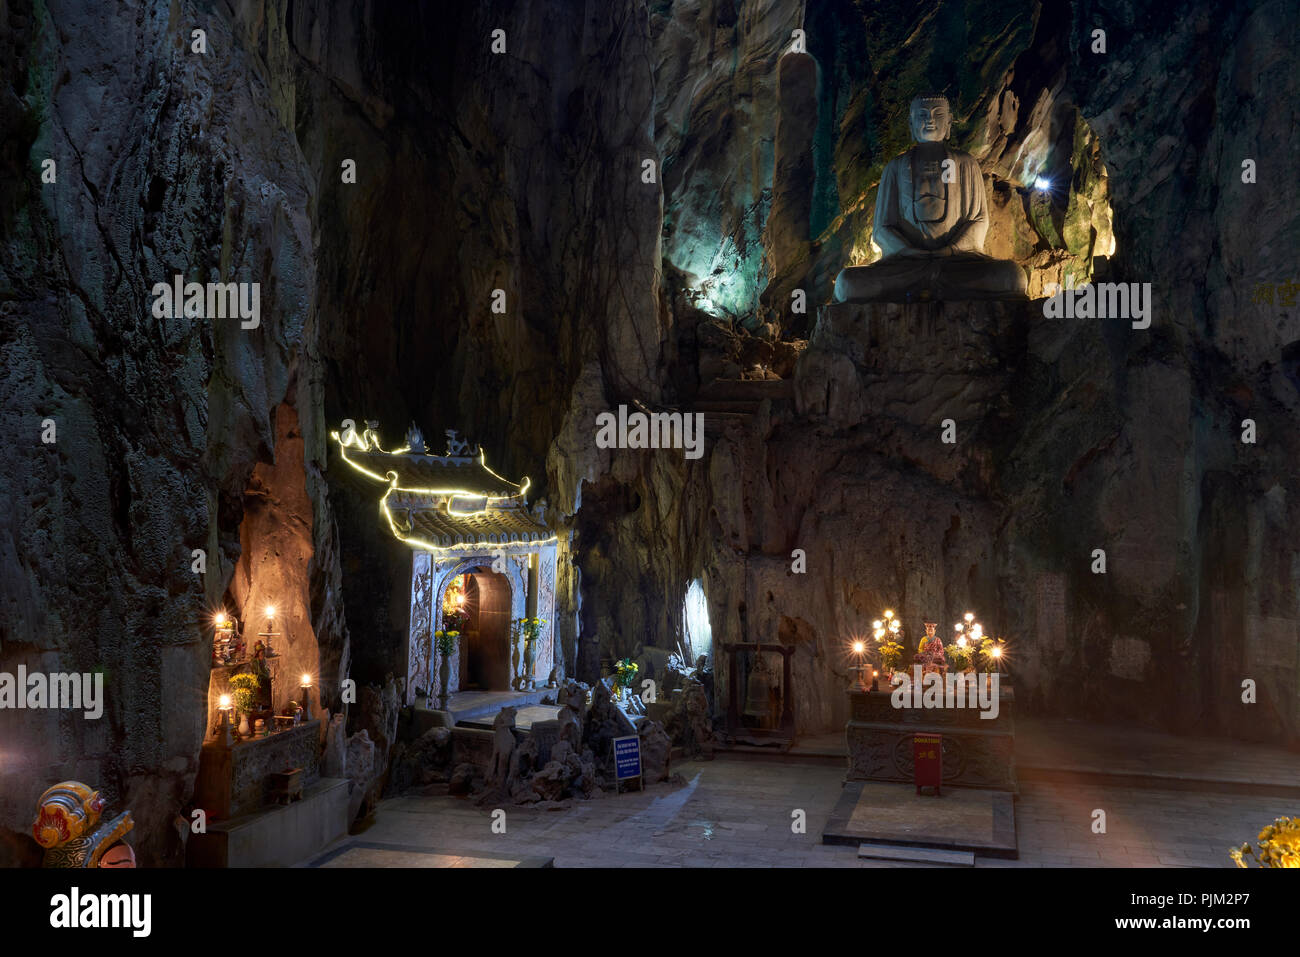 Buddhist temple within Huyen Khong Cave in the Marble Mountains, halfway between Hoi An and Da Nang, Vietnam. The temple is part of a complex of caves Stock Photo